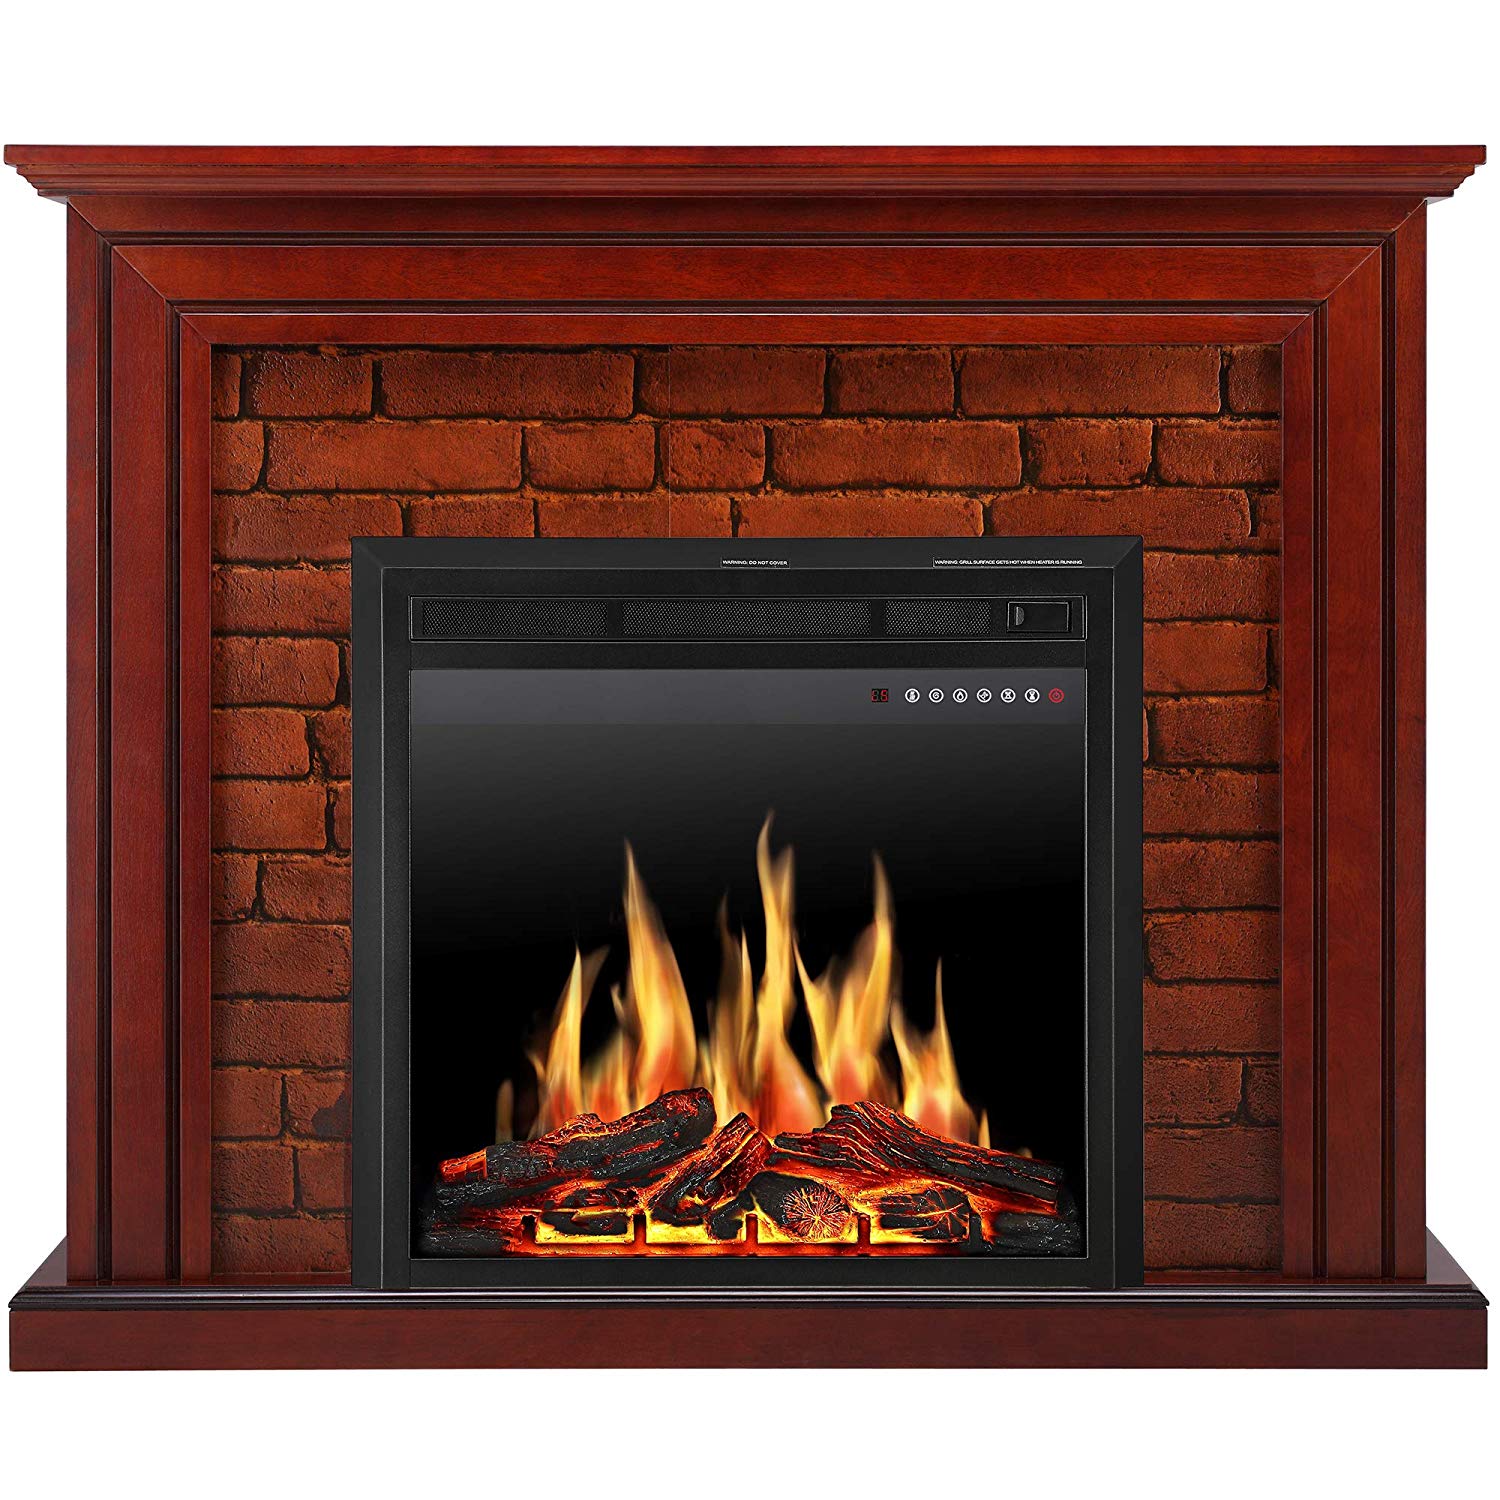 Wall Mount Electric Fireplace Insert Unique Jamfly Electric Fireplace Mantel Package Traditional Brick Wall Design Heater with Remote Control and Led touch Screen Home Accent Furnishings